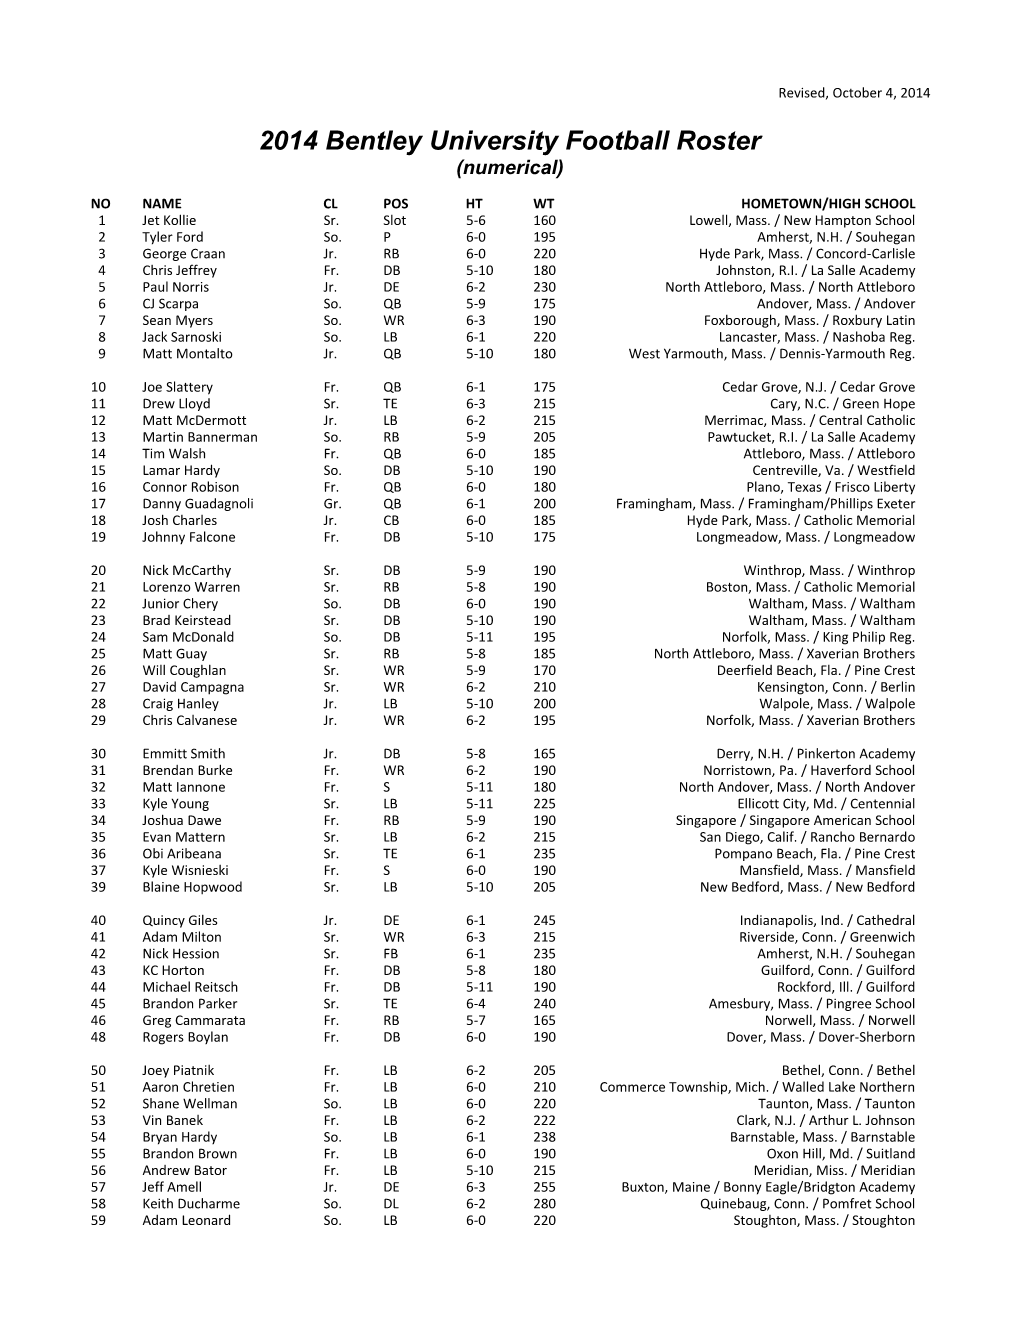 2005 Bentley College Football Roster (Alphabetical)